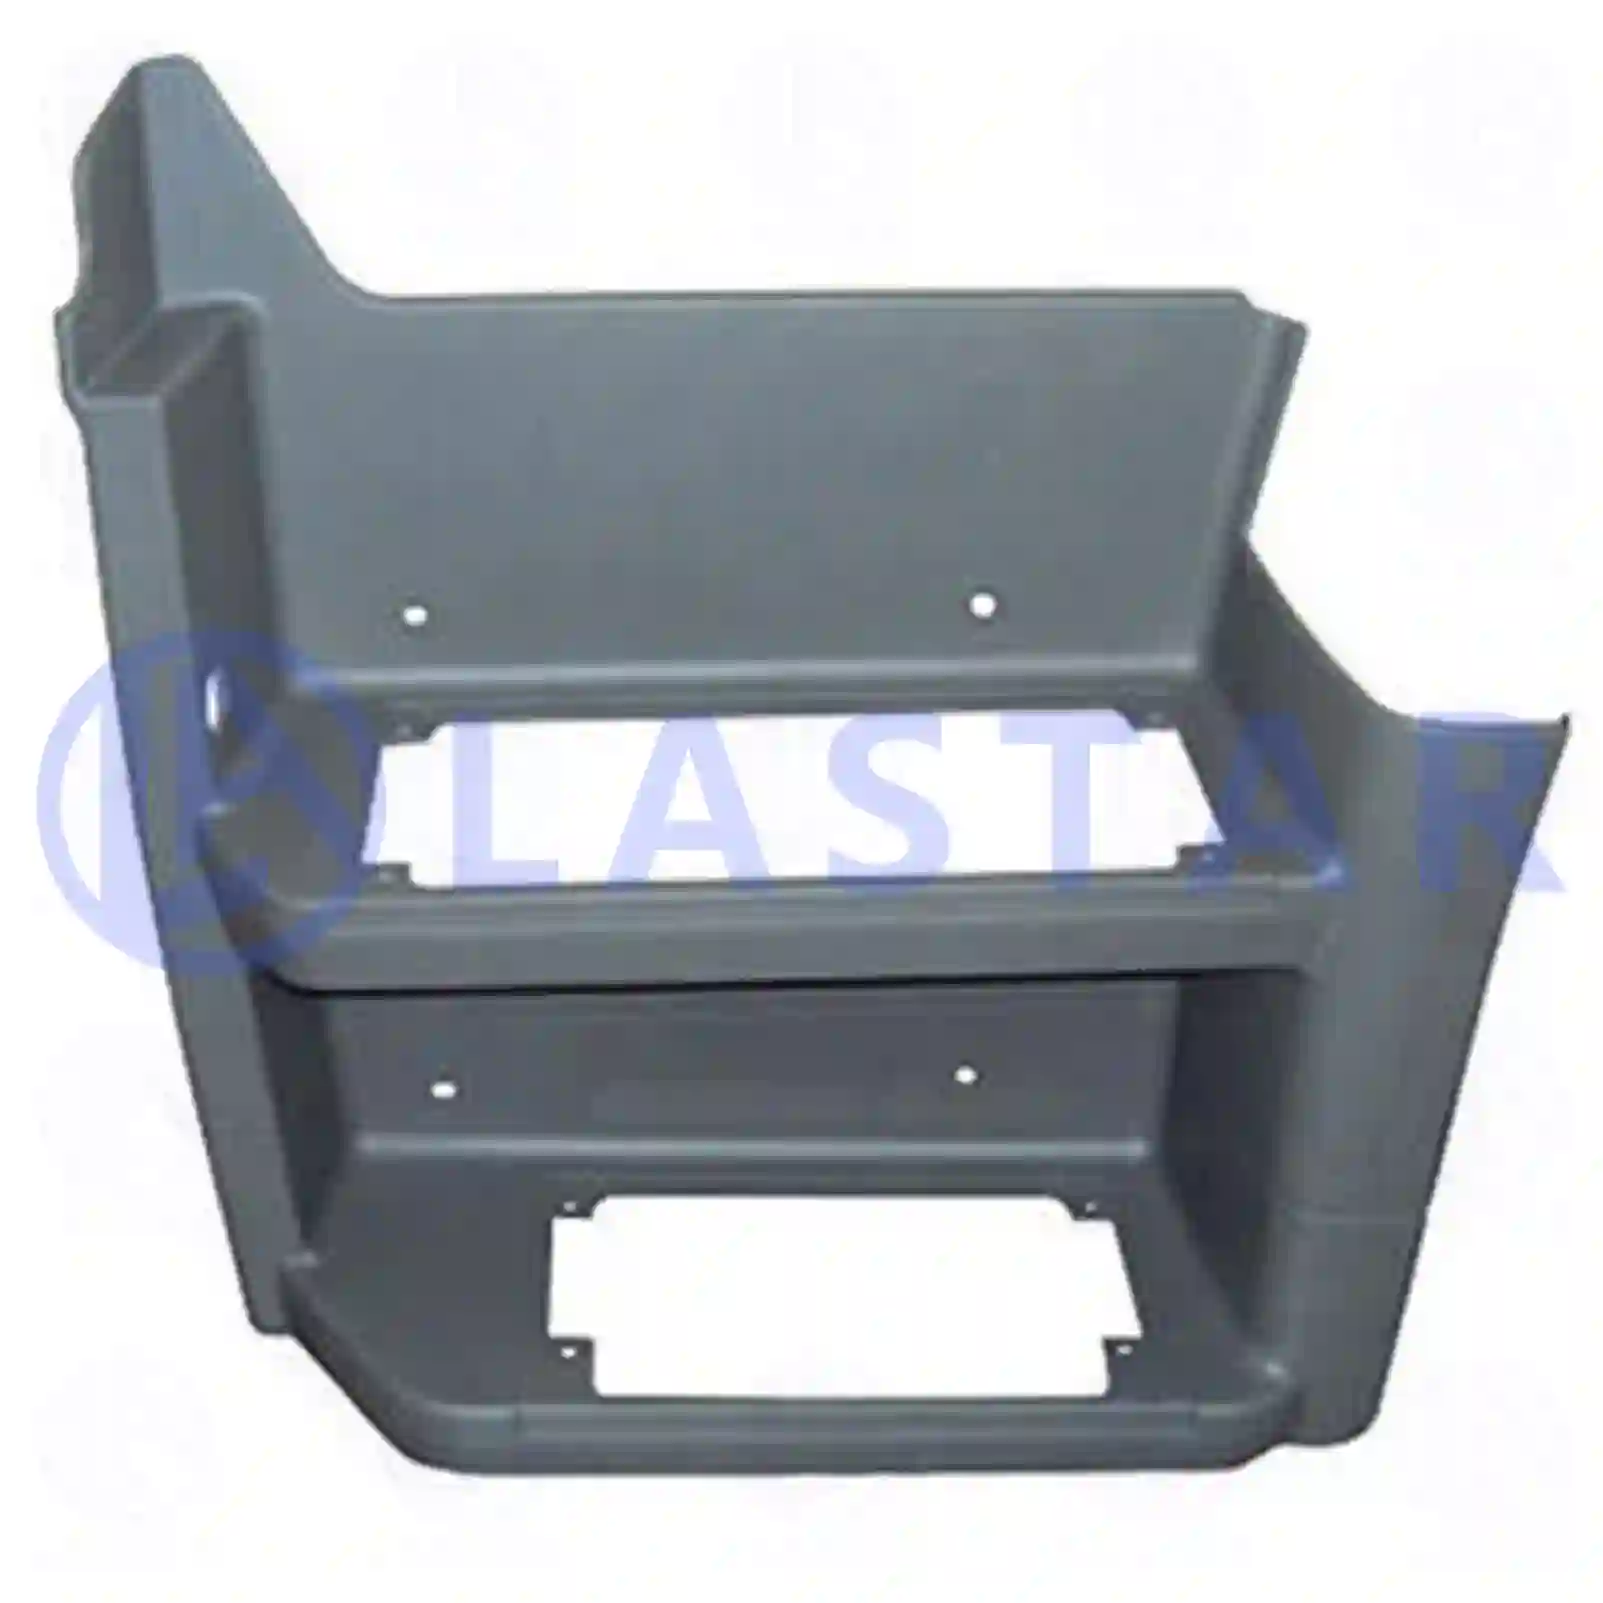 Step well case, lower, left, 77719054, 3756661001, 37566610017354, 9406604701, 9406660101, ZG61208-0008 ||  77719054 Lastar Spare Part | Truck Spare Parts, Auotomotive Spare Parts Step well case, lower, left, 77719054, 3756661001, 37566610017354, 9406604701, 9406660101, ZG61208-0008 ||  77719054 Lastar Spare Part | Truck Spare Parts, Auotomotive Spare Parts